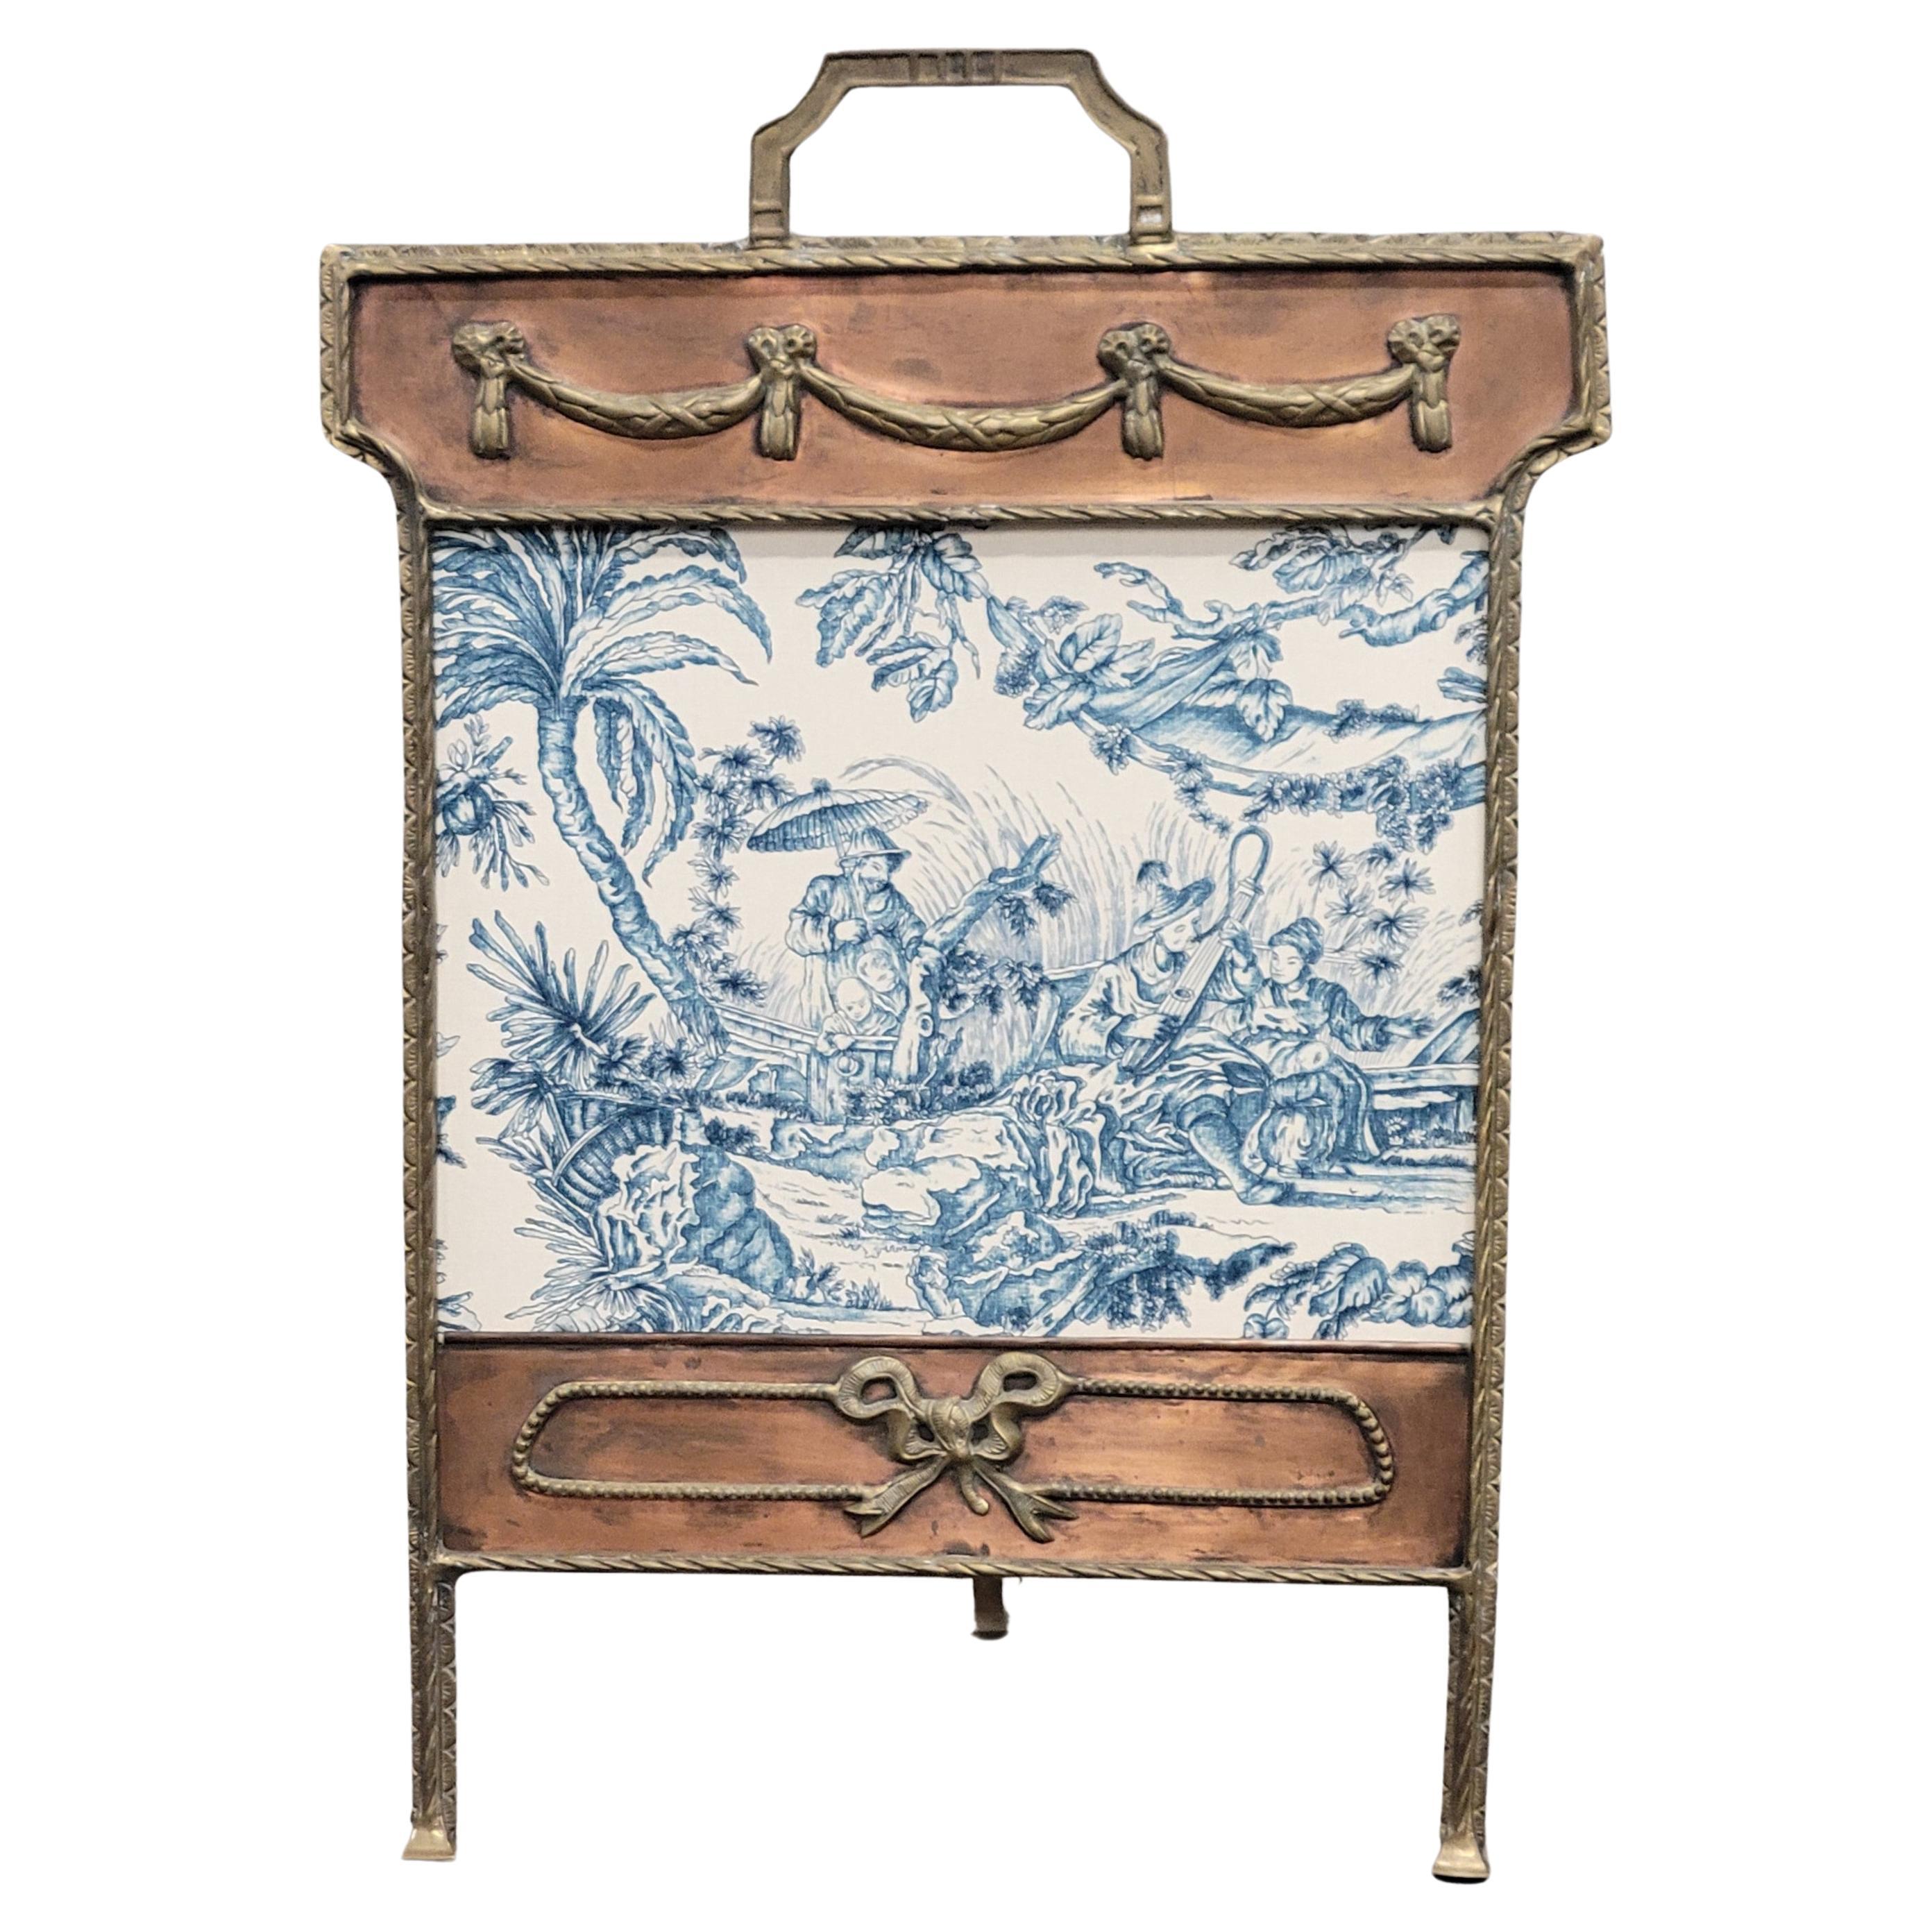 Antique 1920s Copper and Brass Firescreen With Schumacher Asian Toile